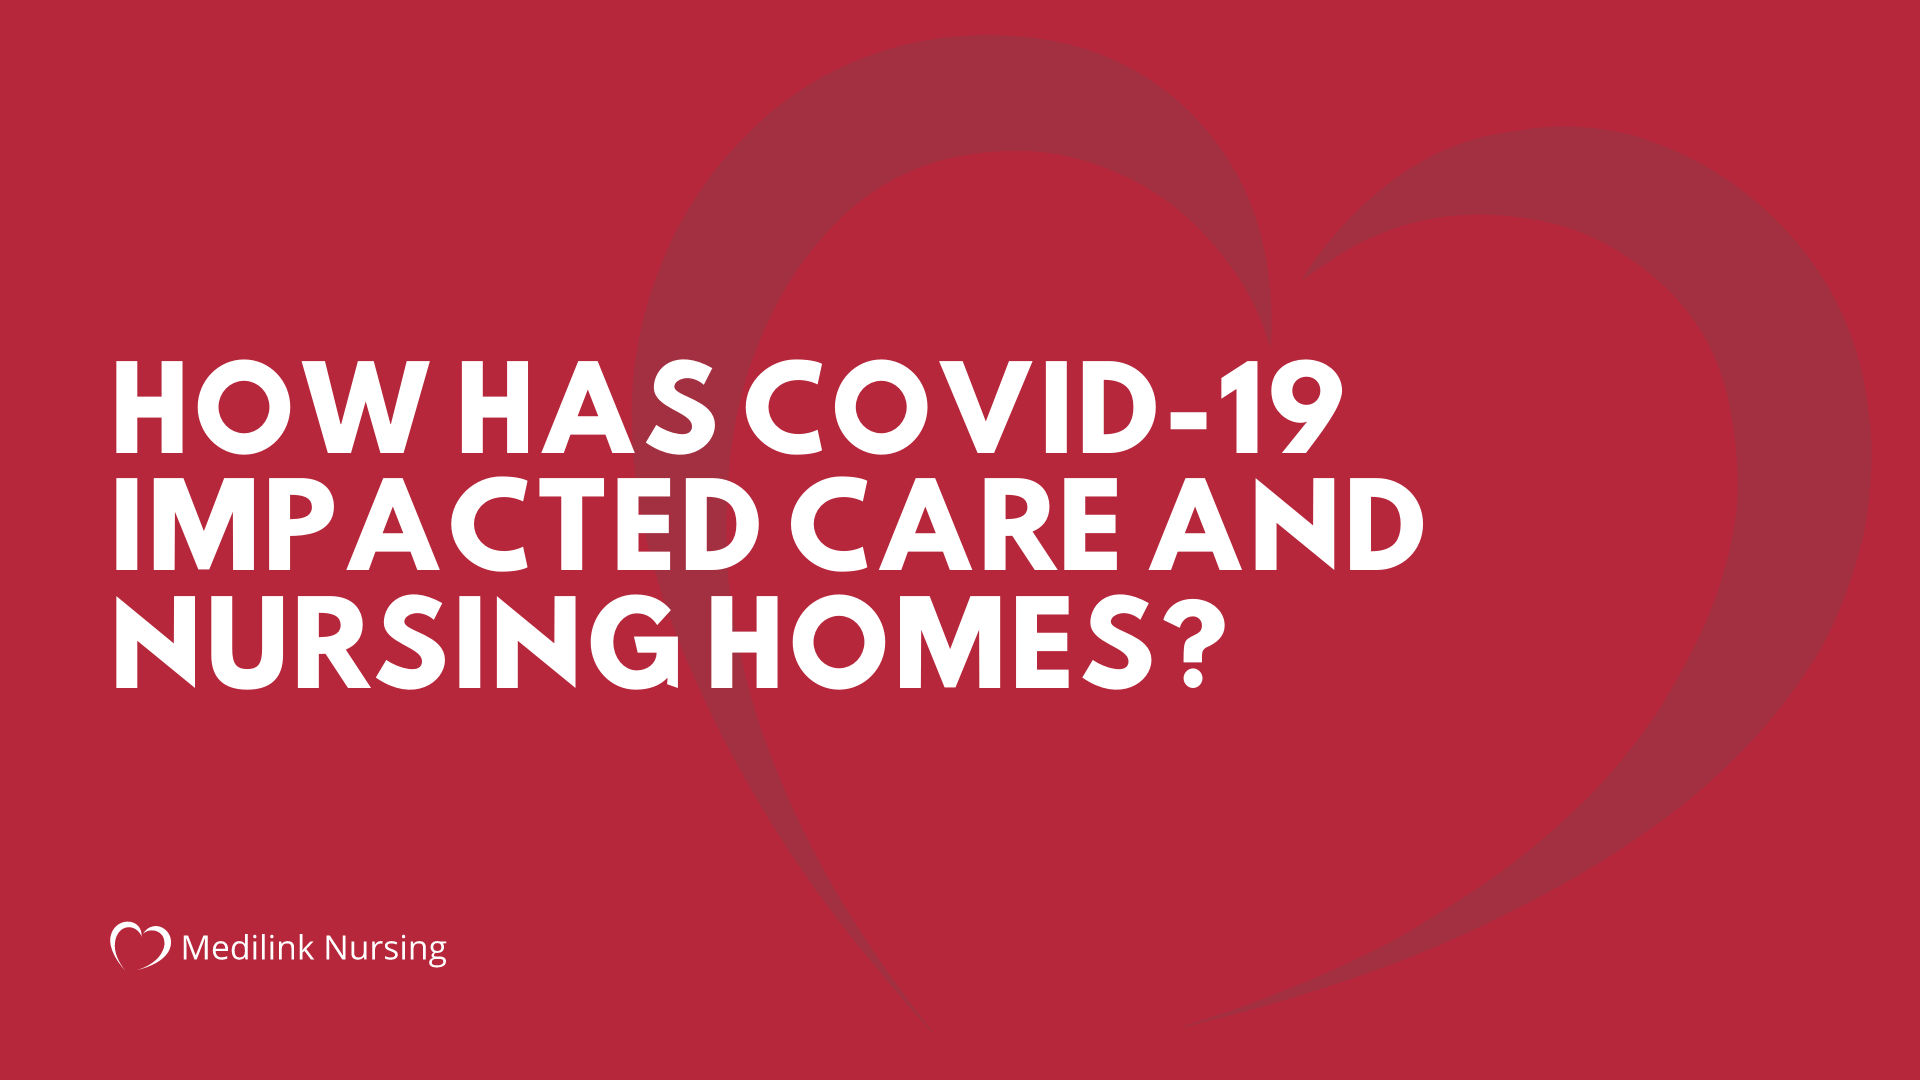 How Has COVID-19 Impacted Care and Nursing Homes?